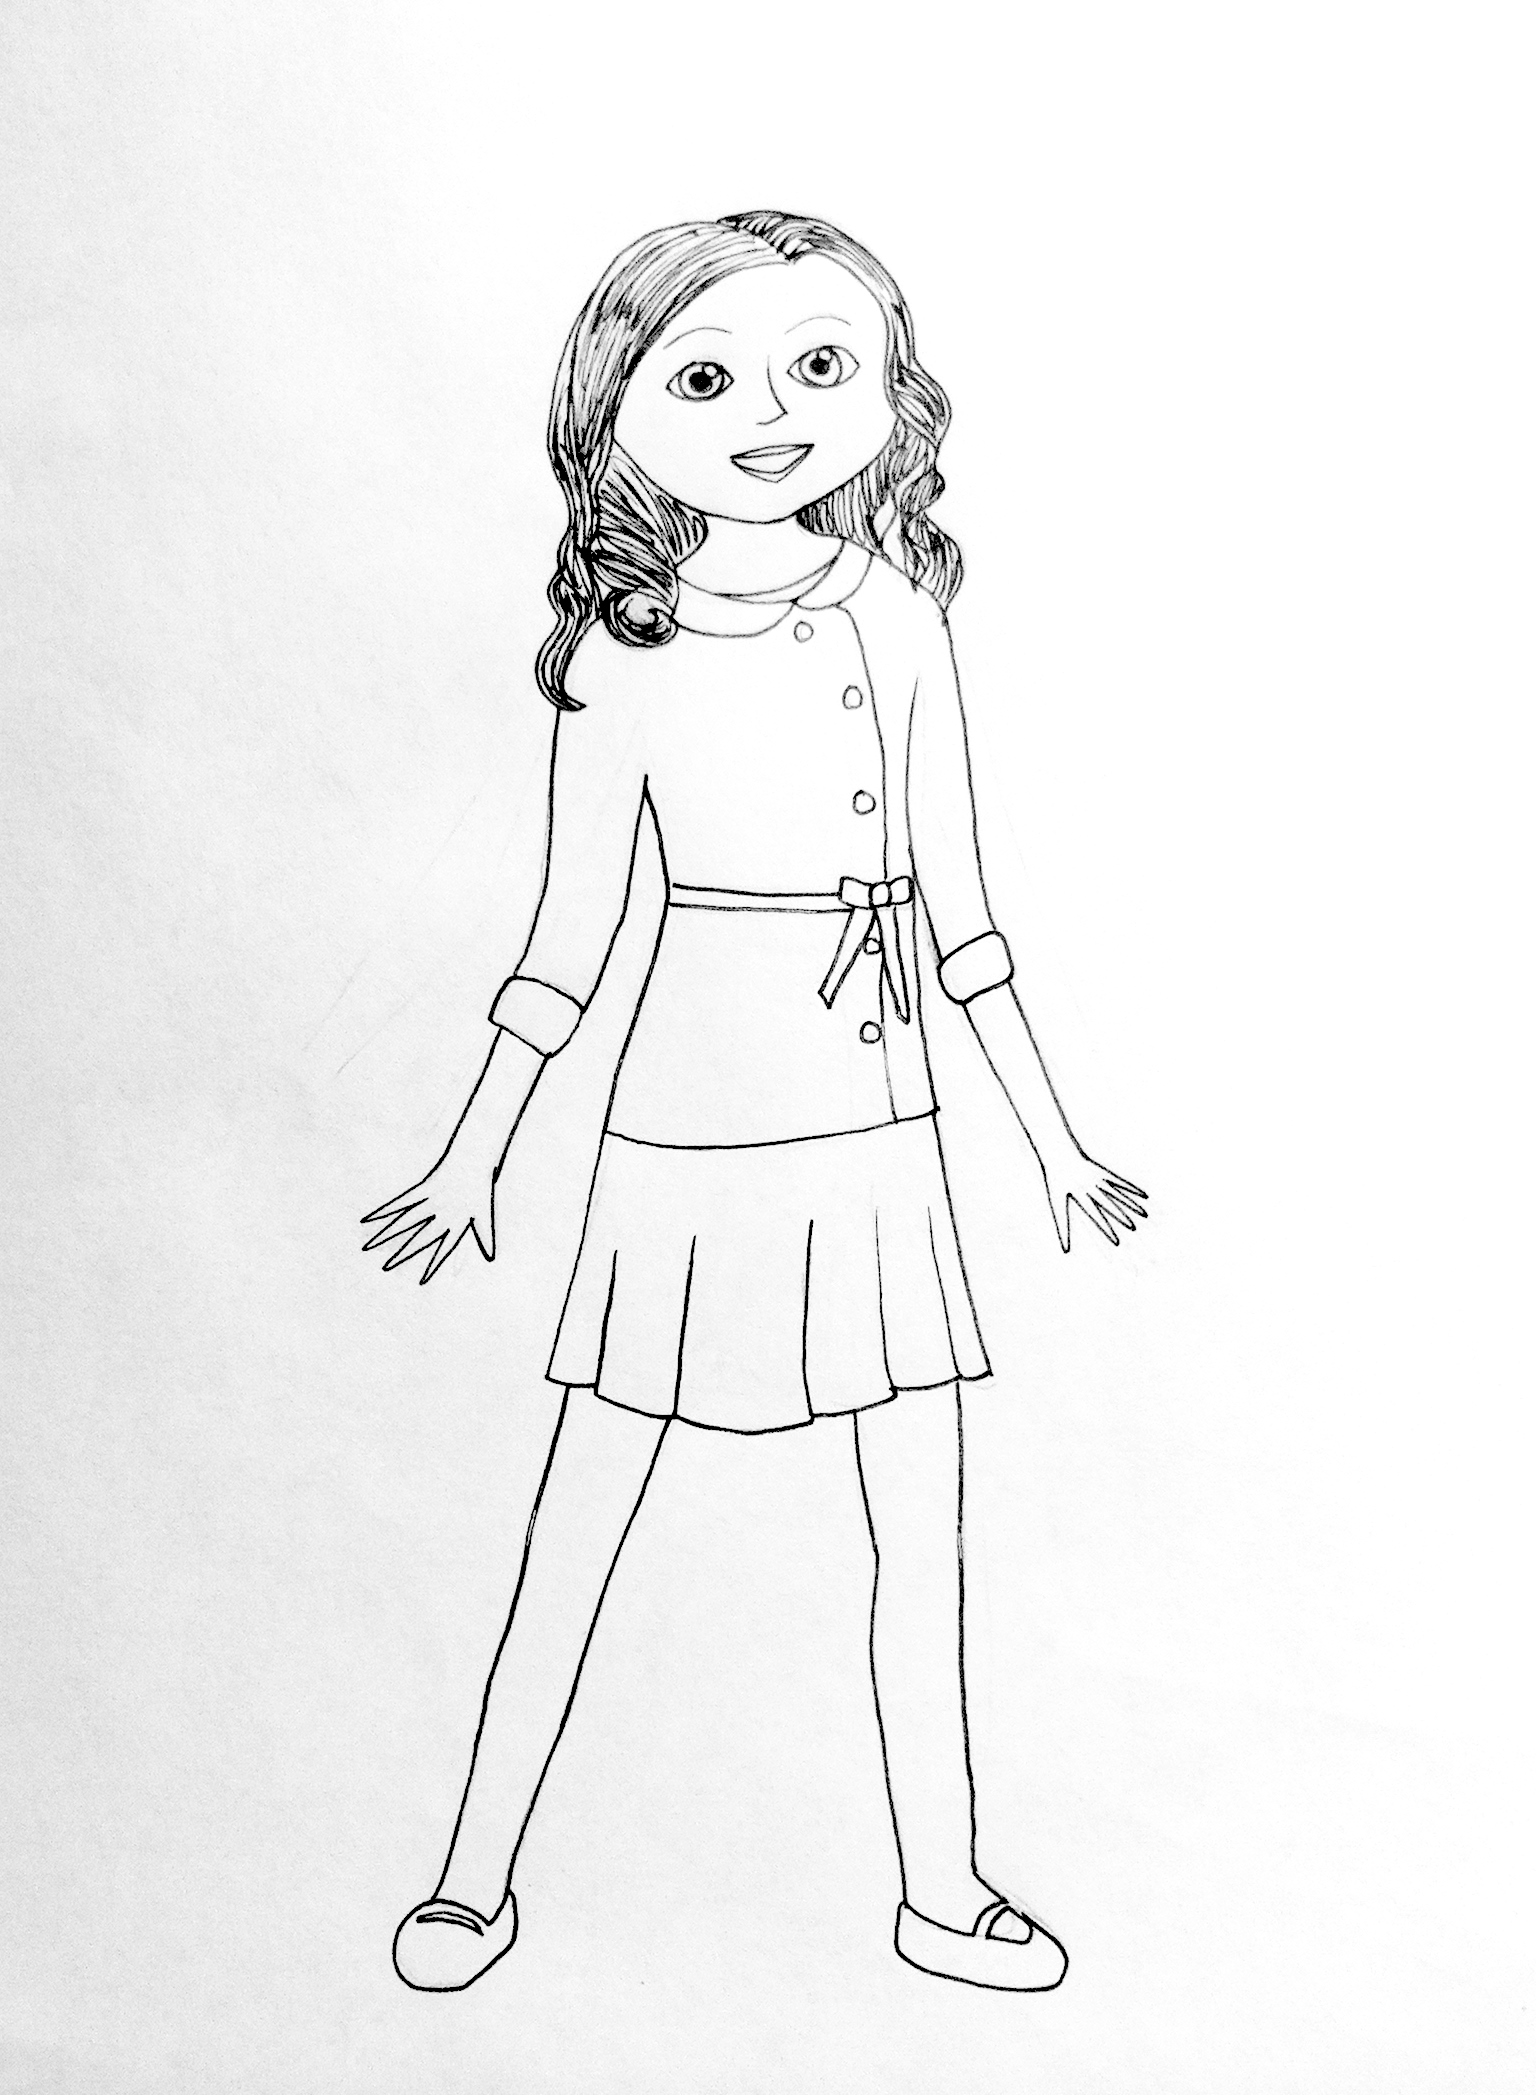 American girl doll coloring pages to download and print for free